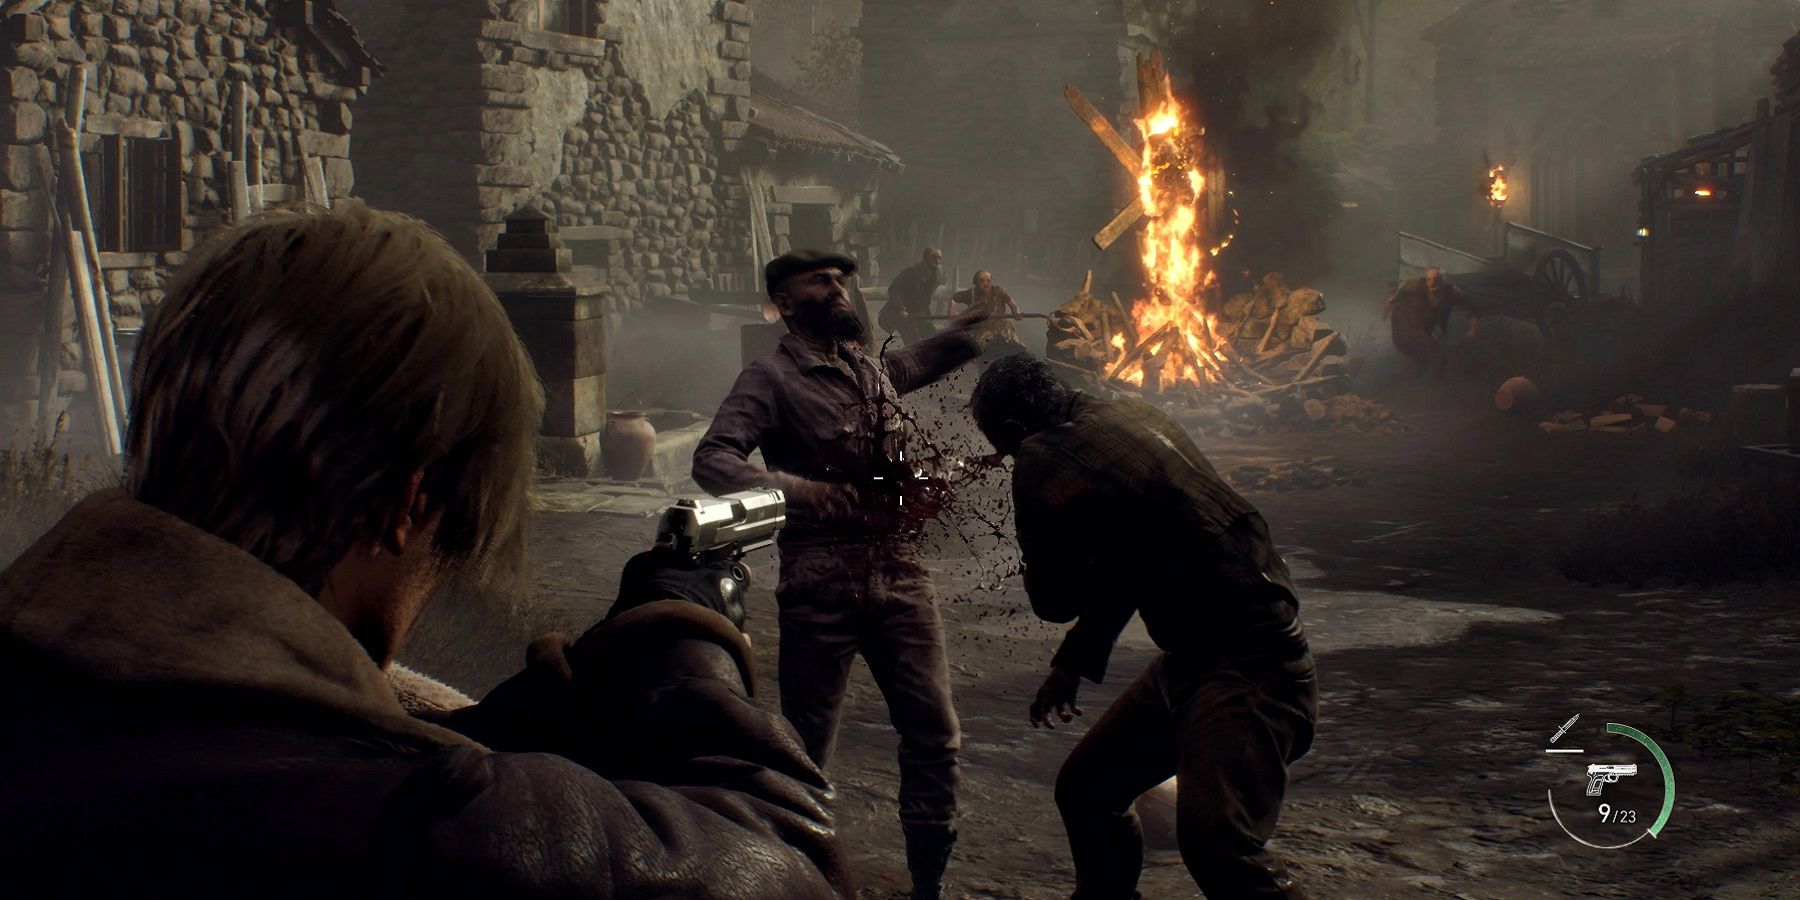 Image from the Resident Evil 4 remake, in which Leon Kennedy shoots some Ganados during the village sequence.